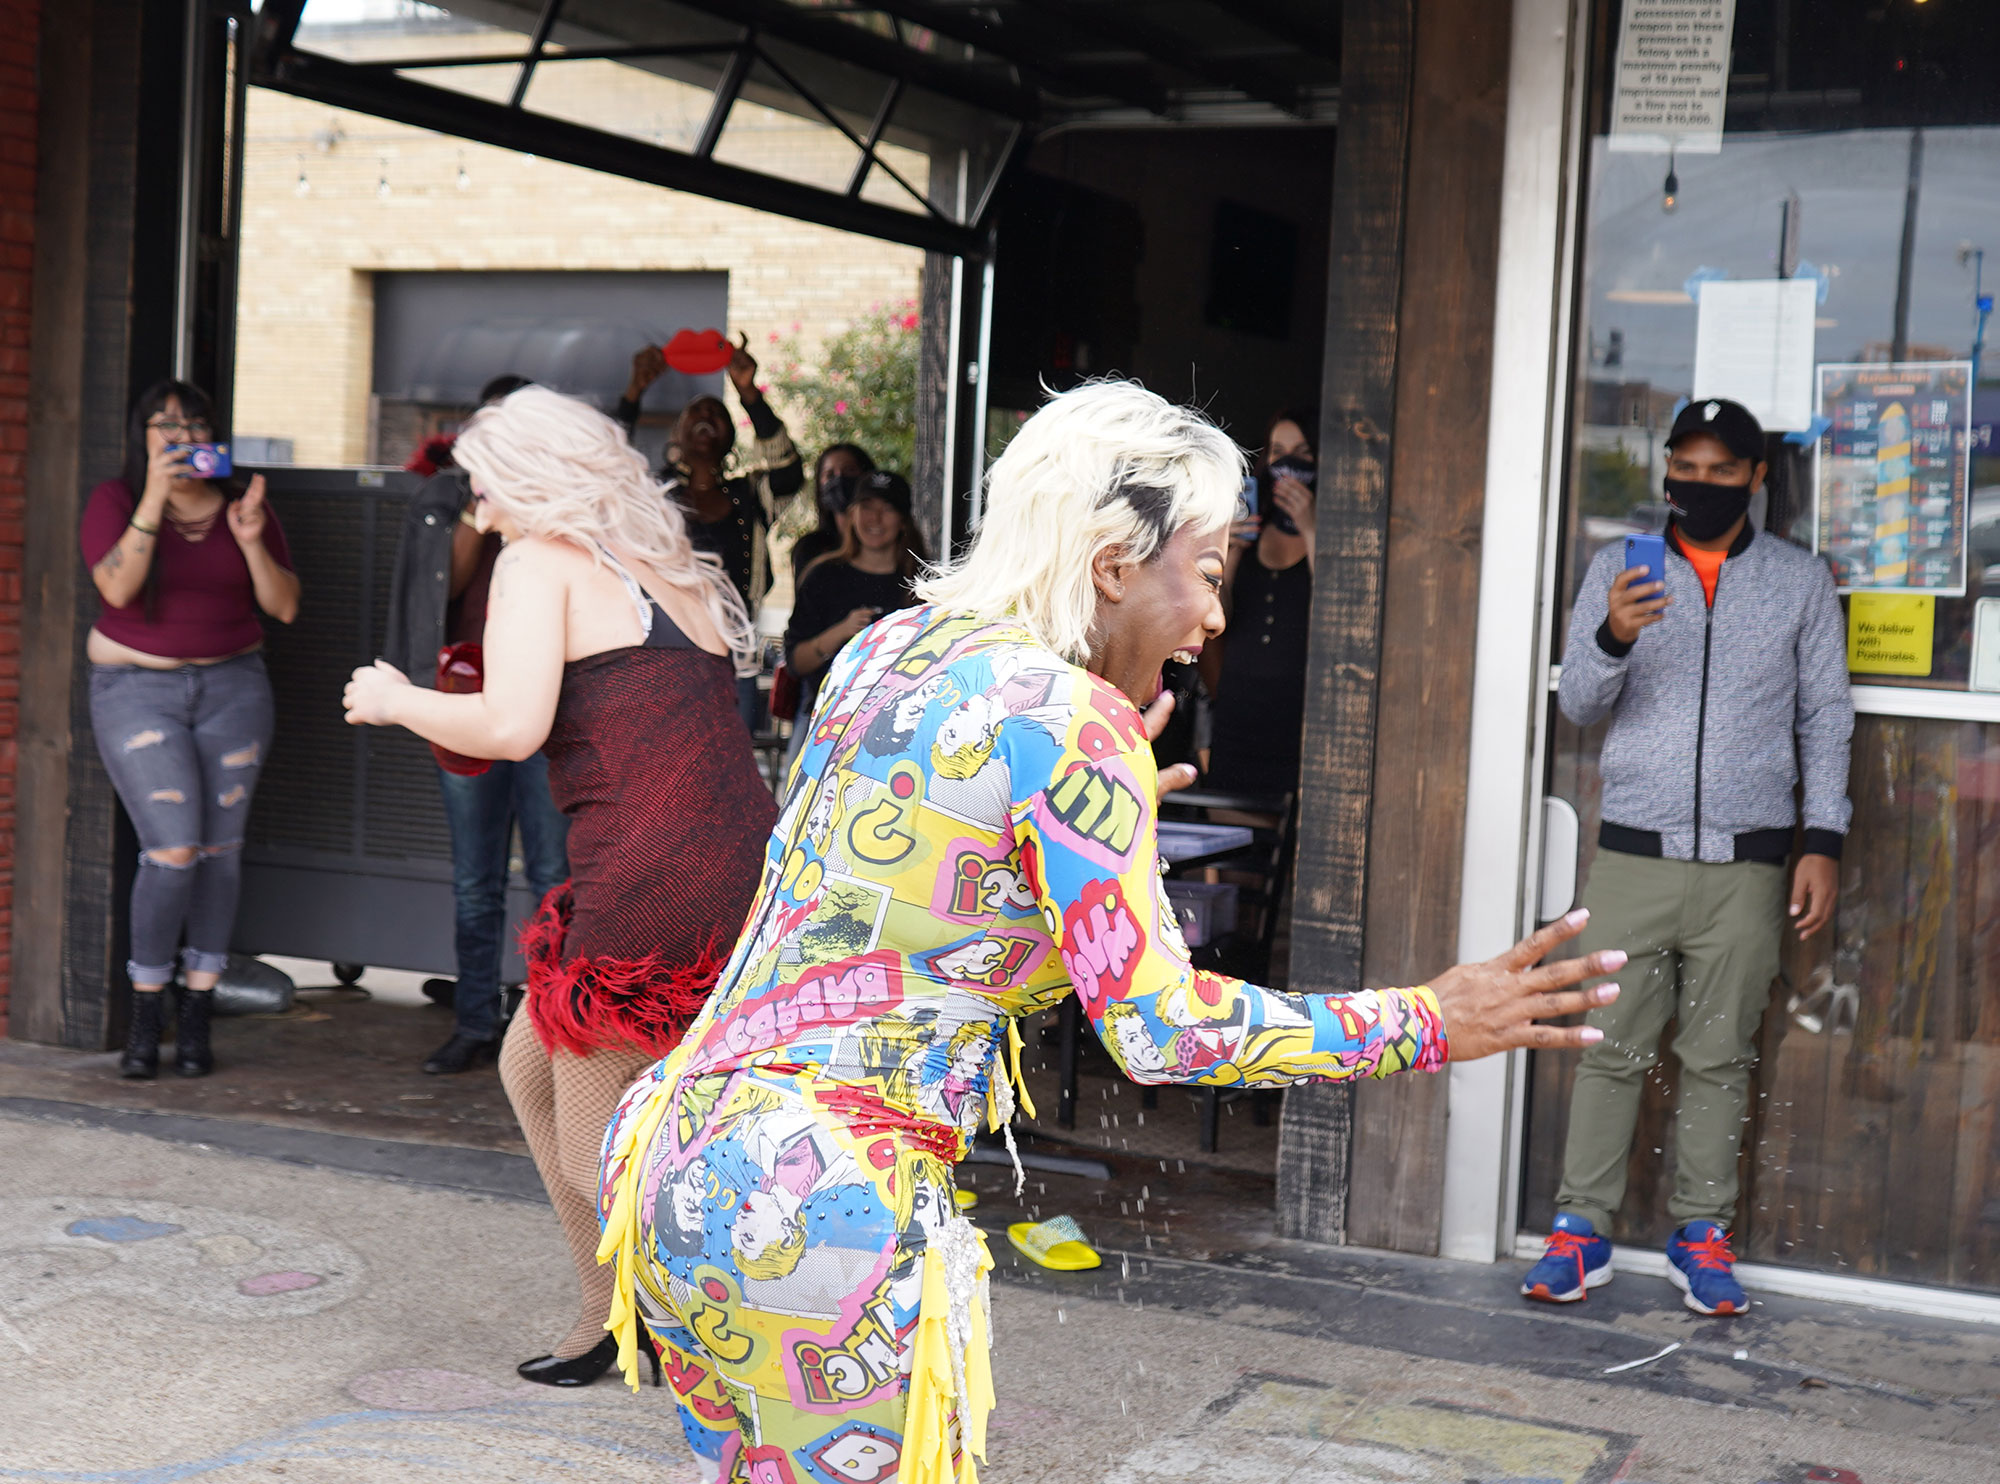 A water fight at Dallas drag brunch at the Free Man.